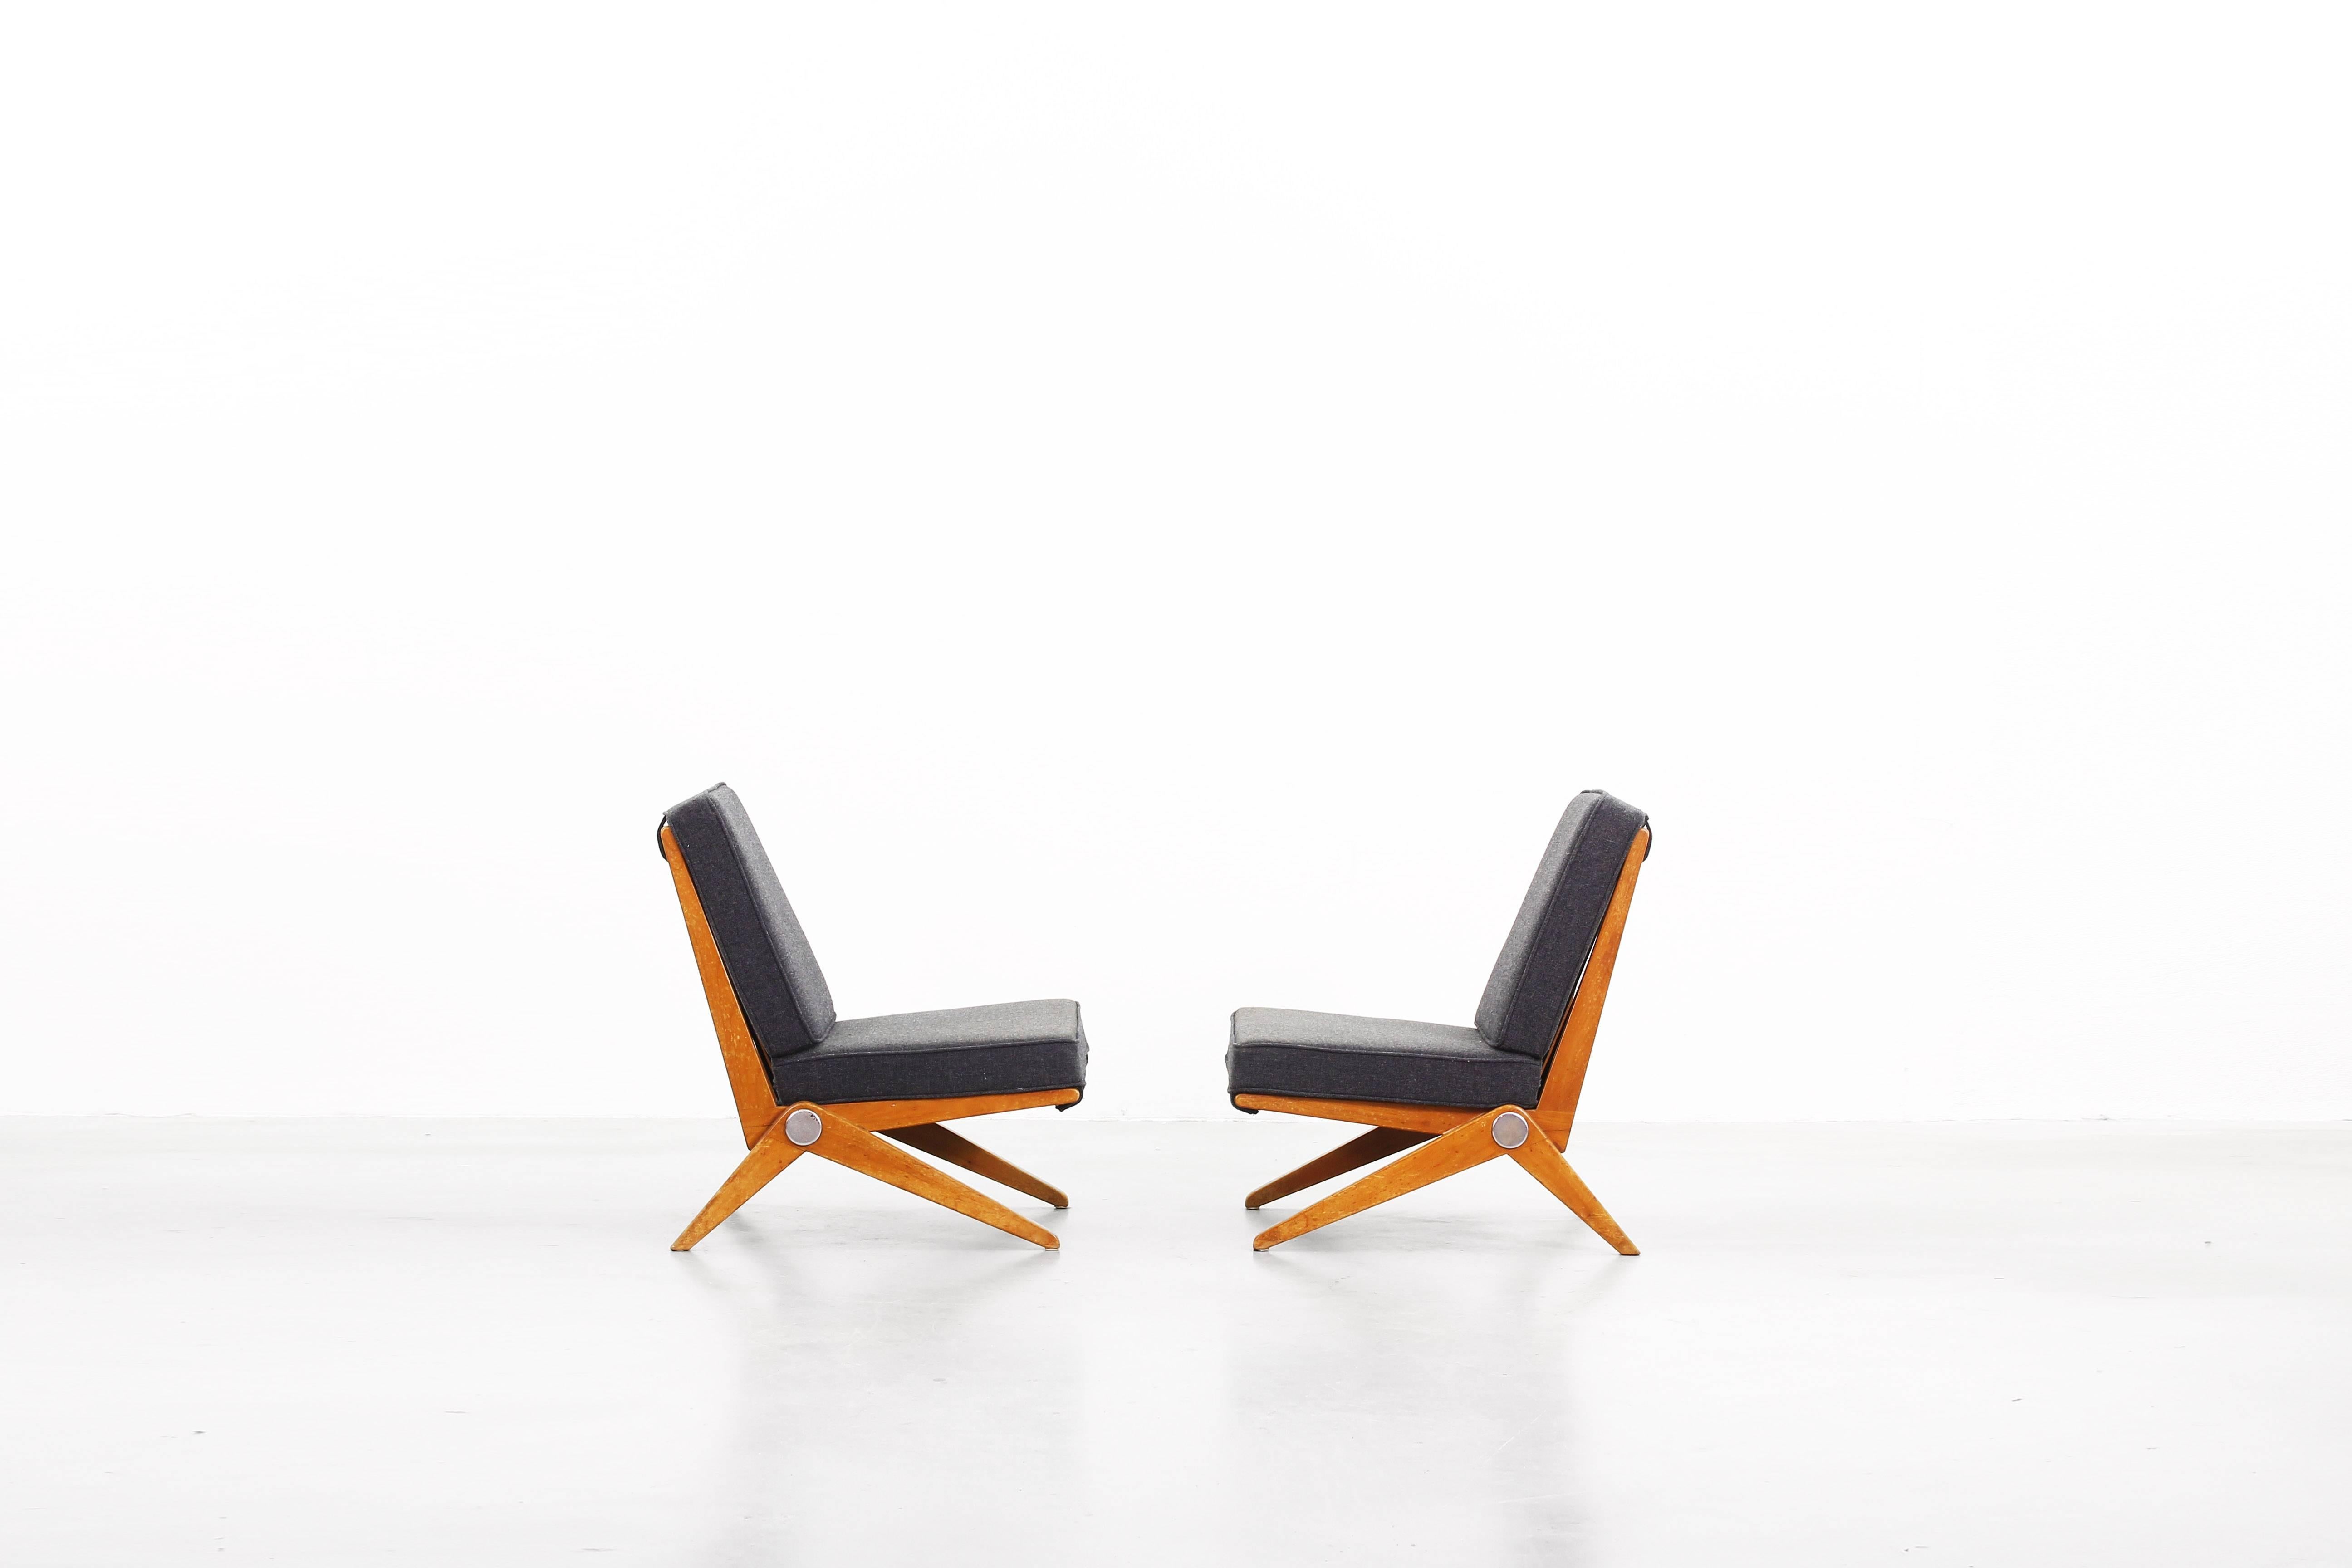 American Pair of Scissor Lounge Chairs by Pierre Jeanneret for Knoll International, 1957